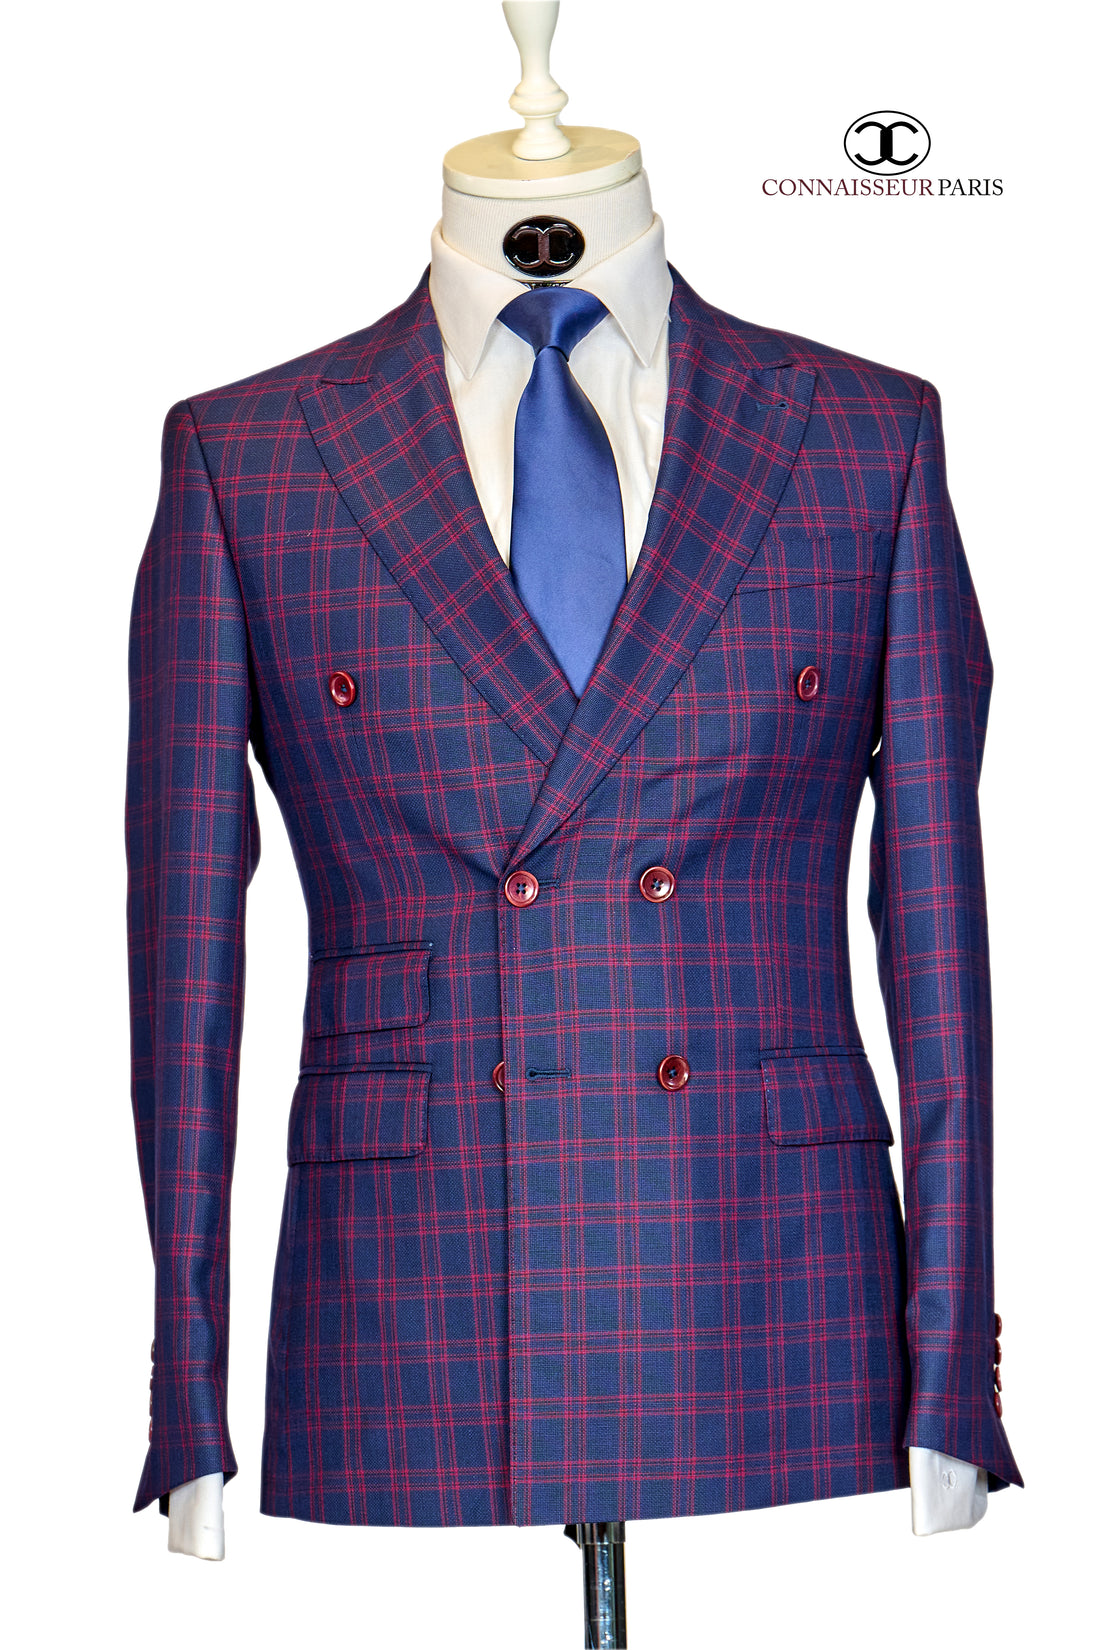 Vitale Barberis - Navy blue with red plaid double breasted slim fit suit